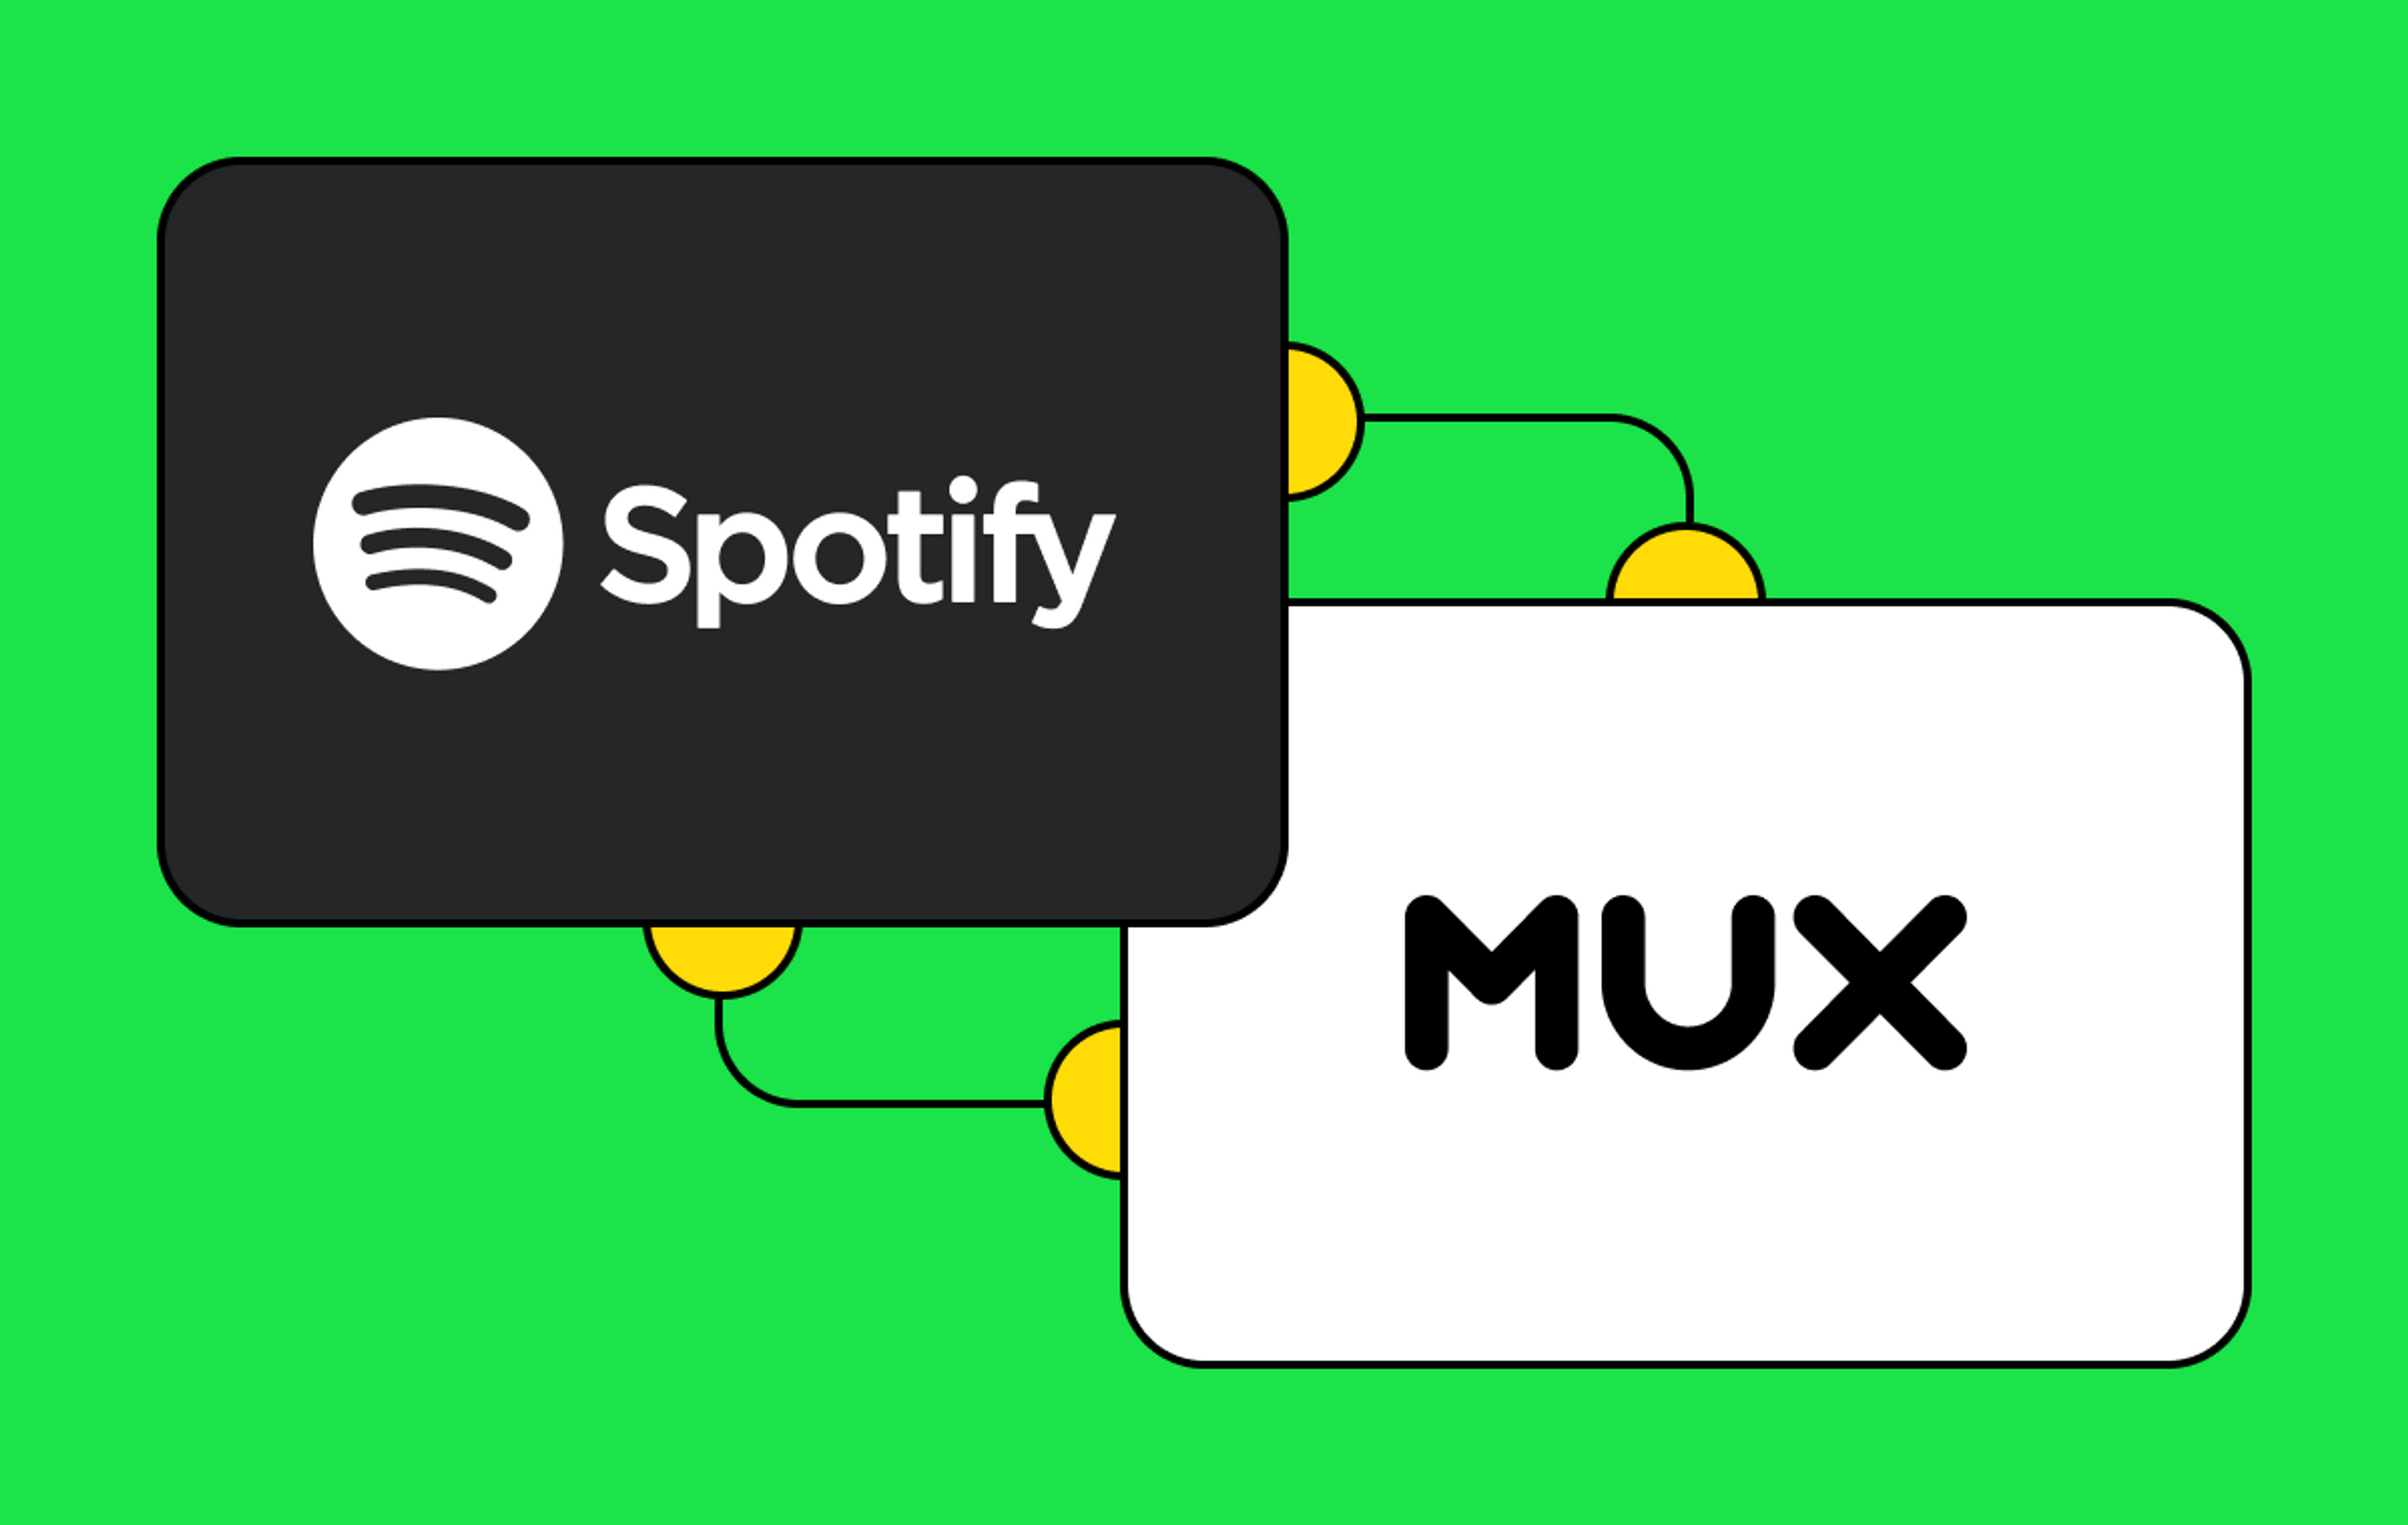  Spotify's logo connected to Mux's logo by two lines on a green background